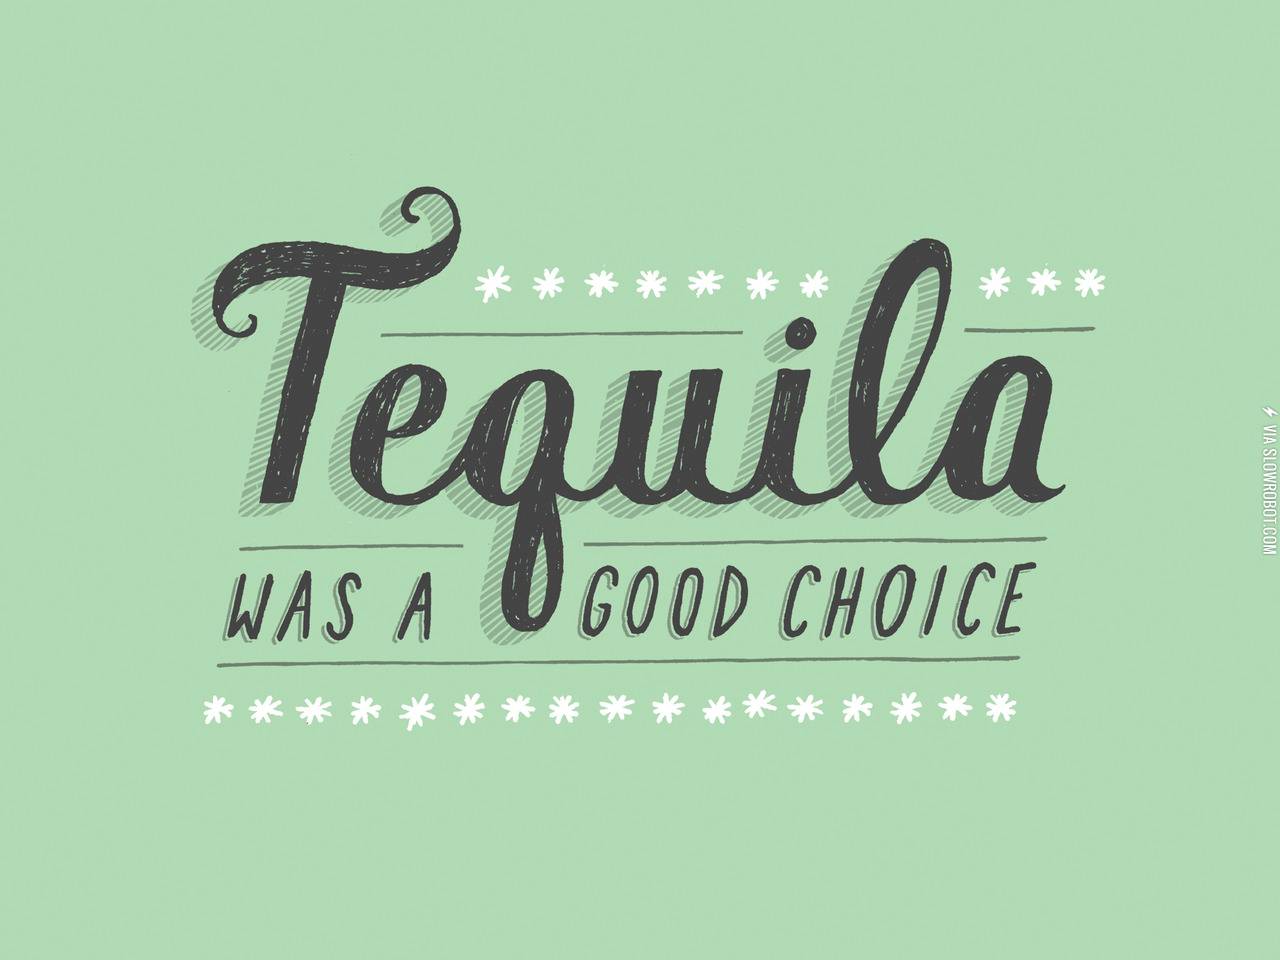 Tequila+was+a+good+choice.